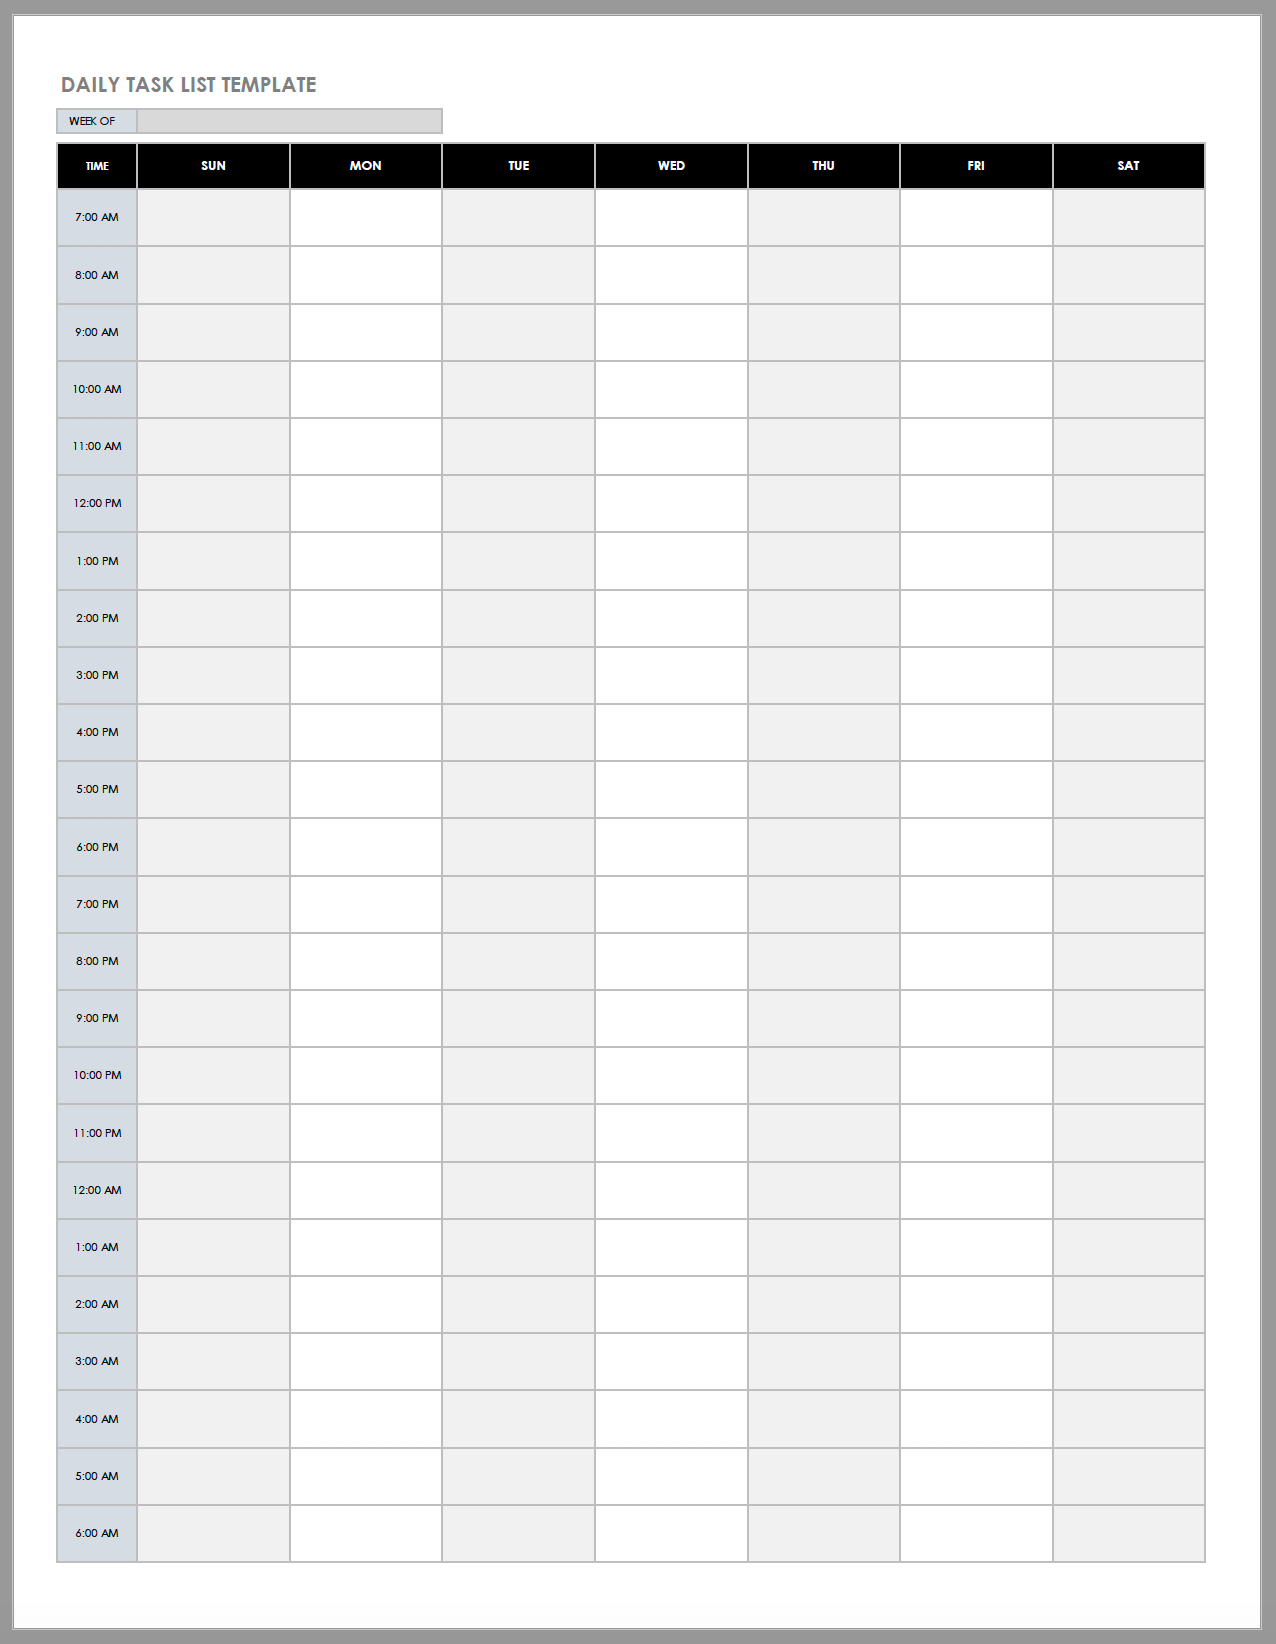 Free Daily Work Schedule Templates  Smartsheet For Employee Daily Task Checklist Template